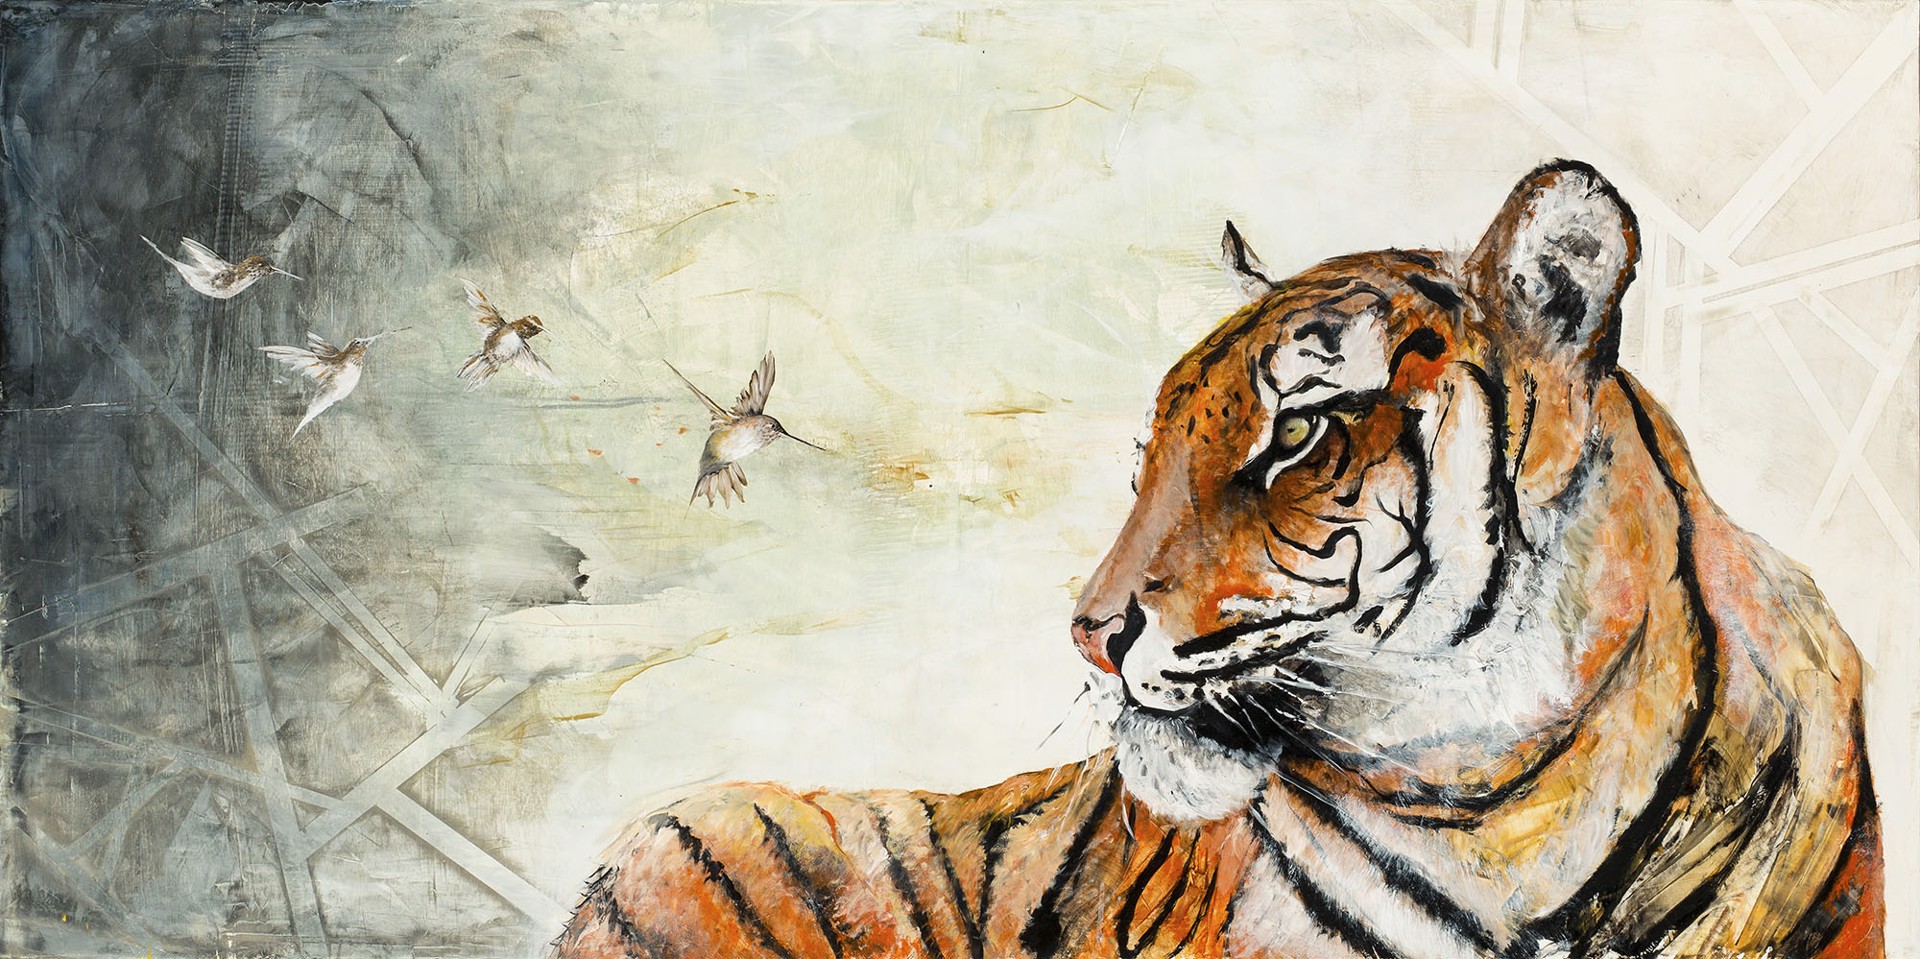 A Contemporary Painting Of A Tiger With Hummingbirds On An Abstract Background By Jenna Von Benedikt